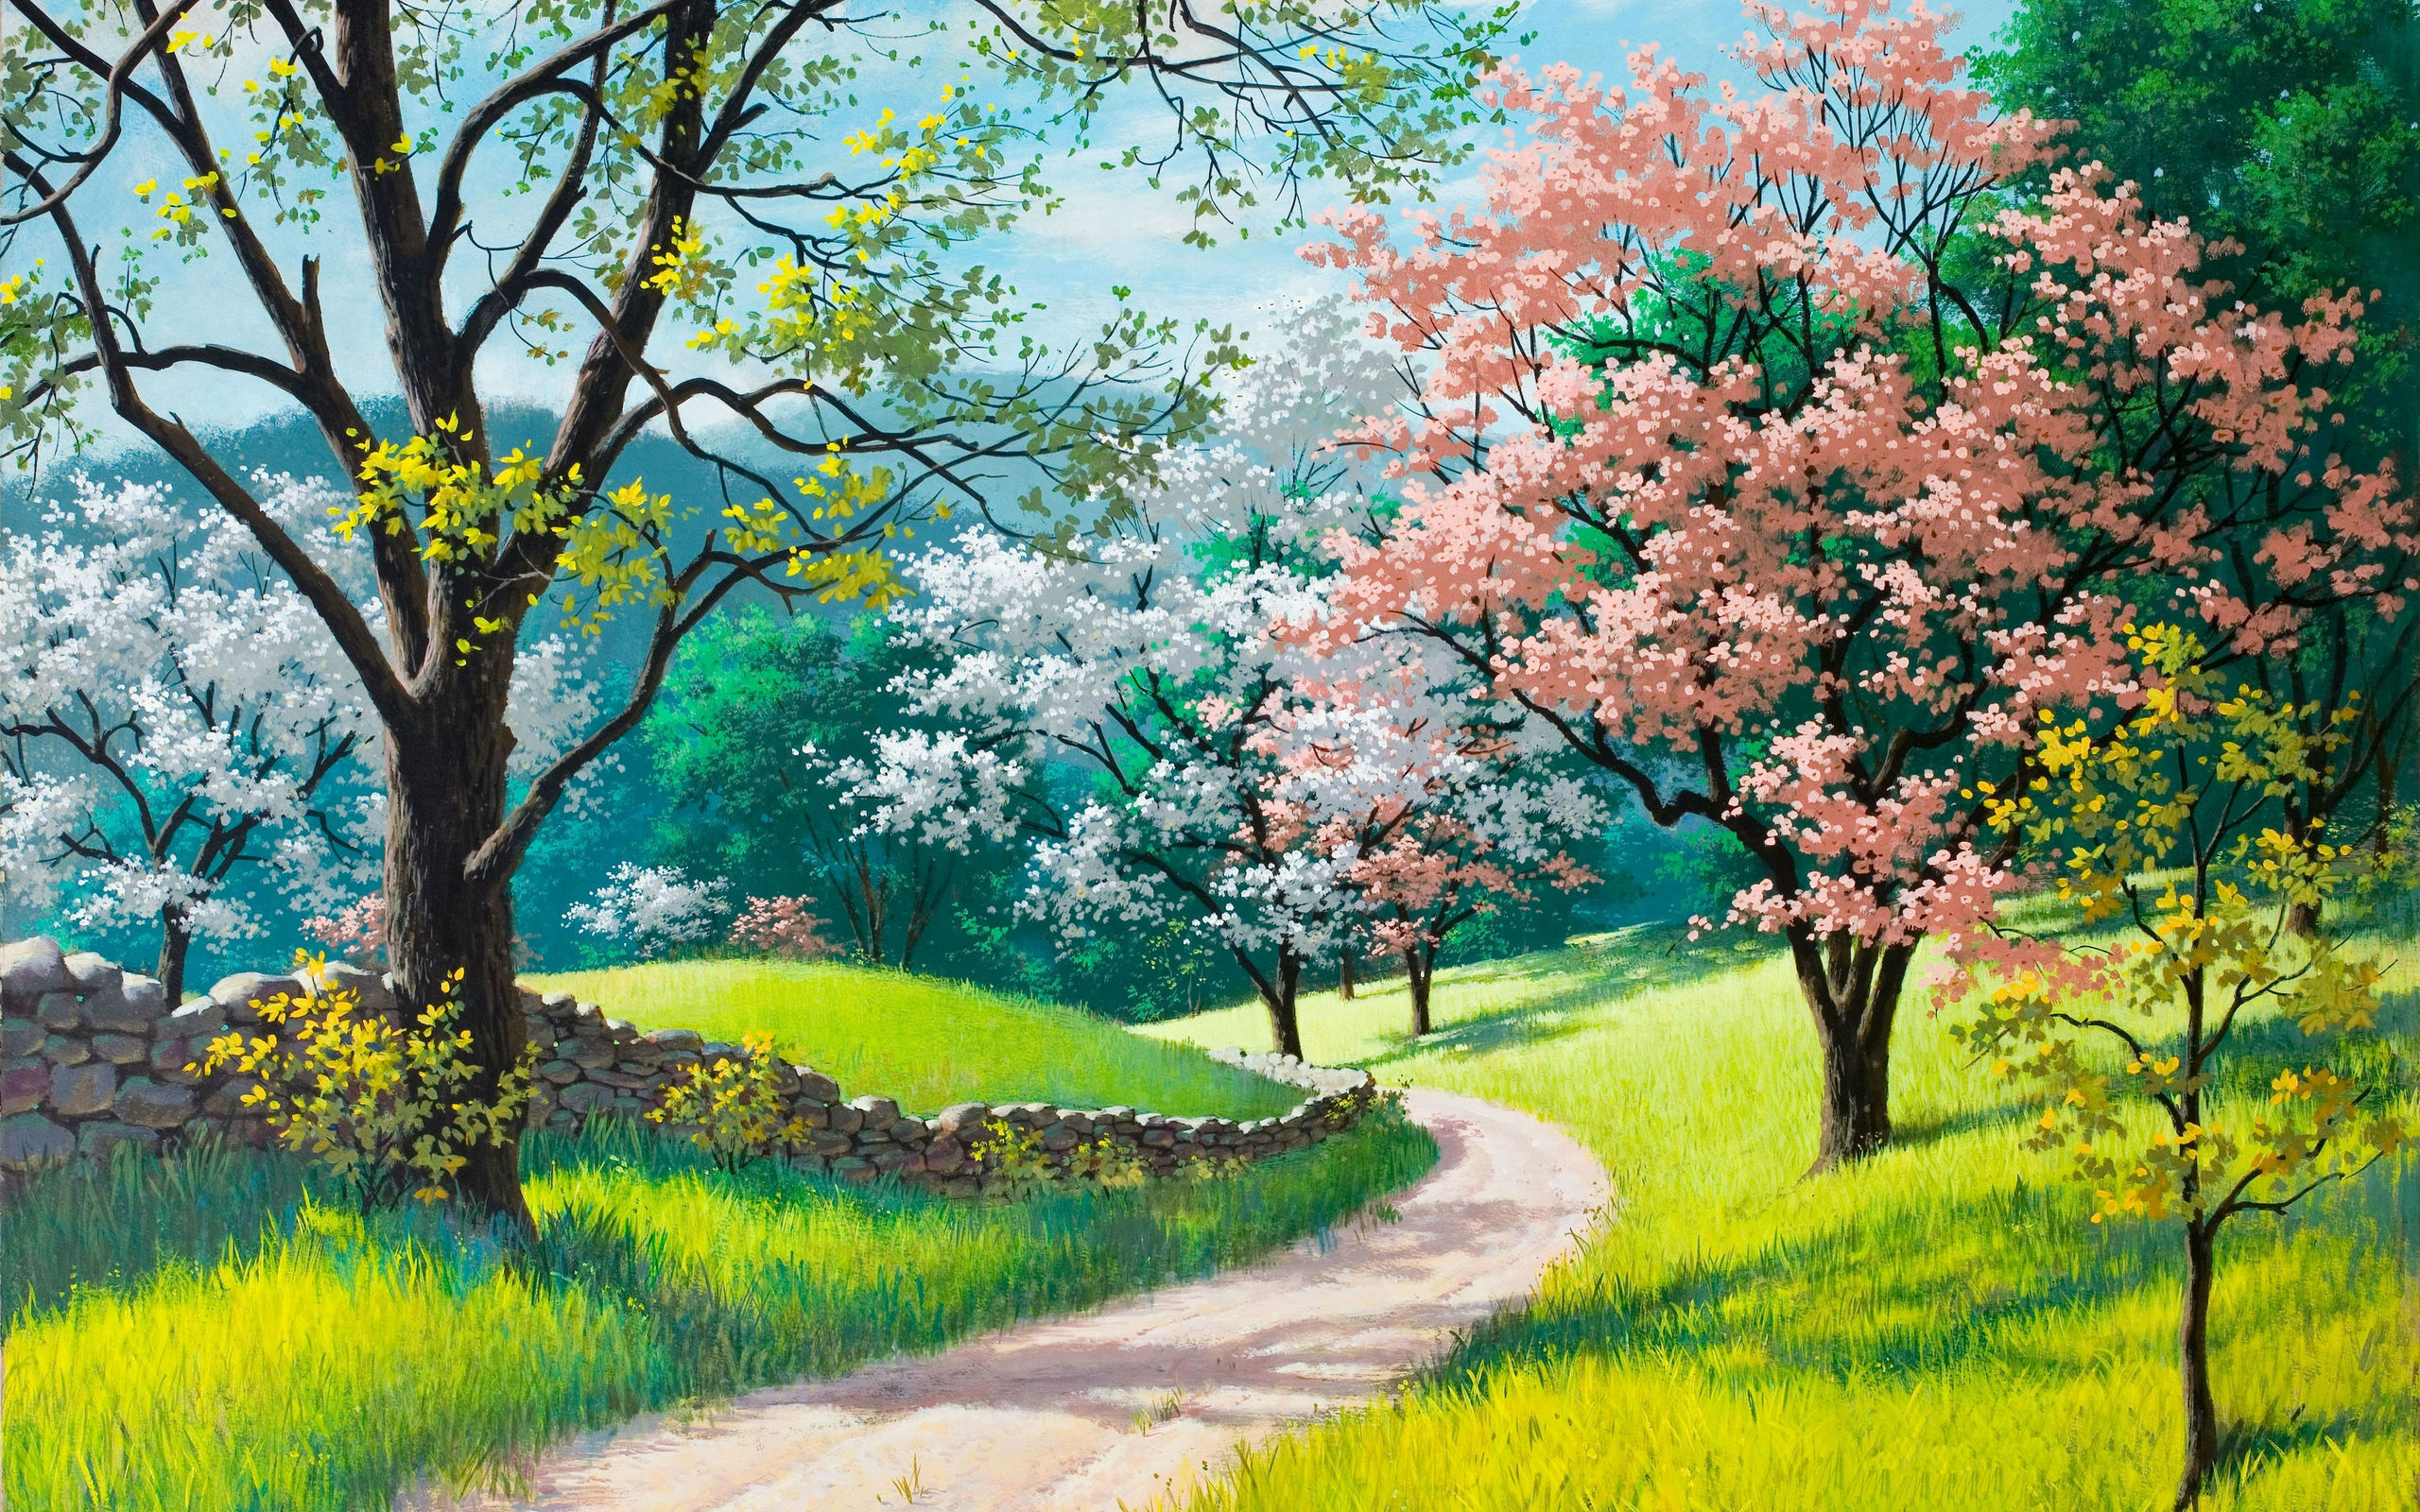 Spring Blossoms Painting Wallpapers - 2560x1600 - 1407502